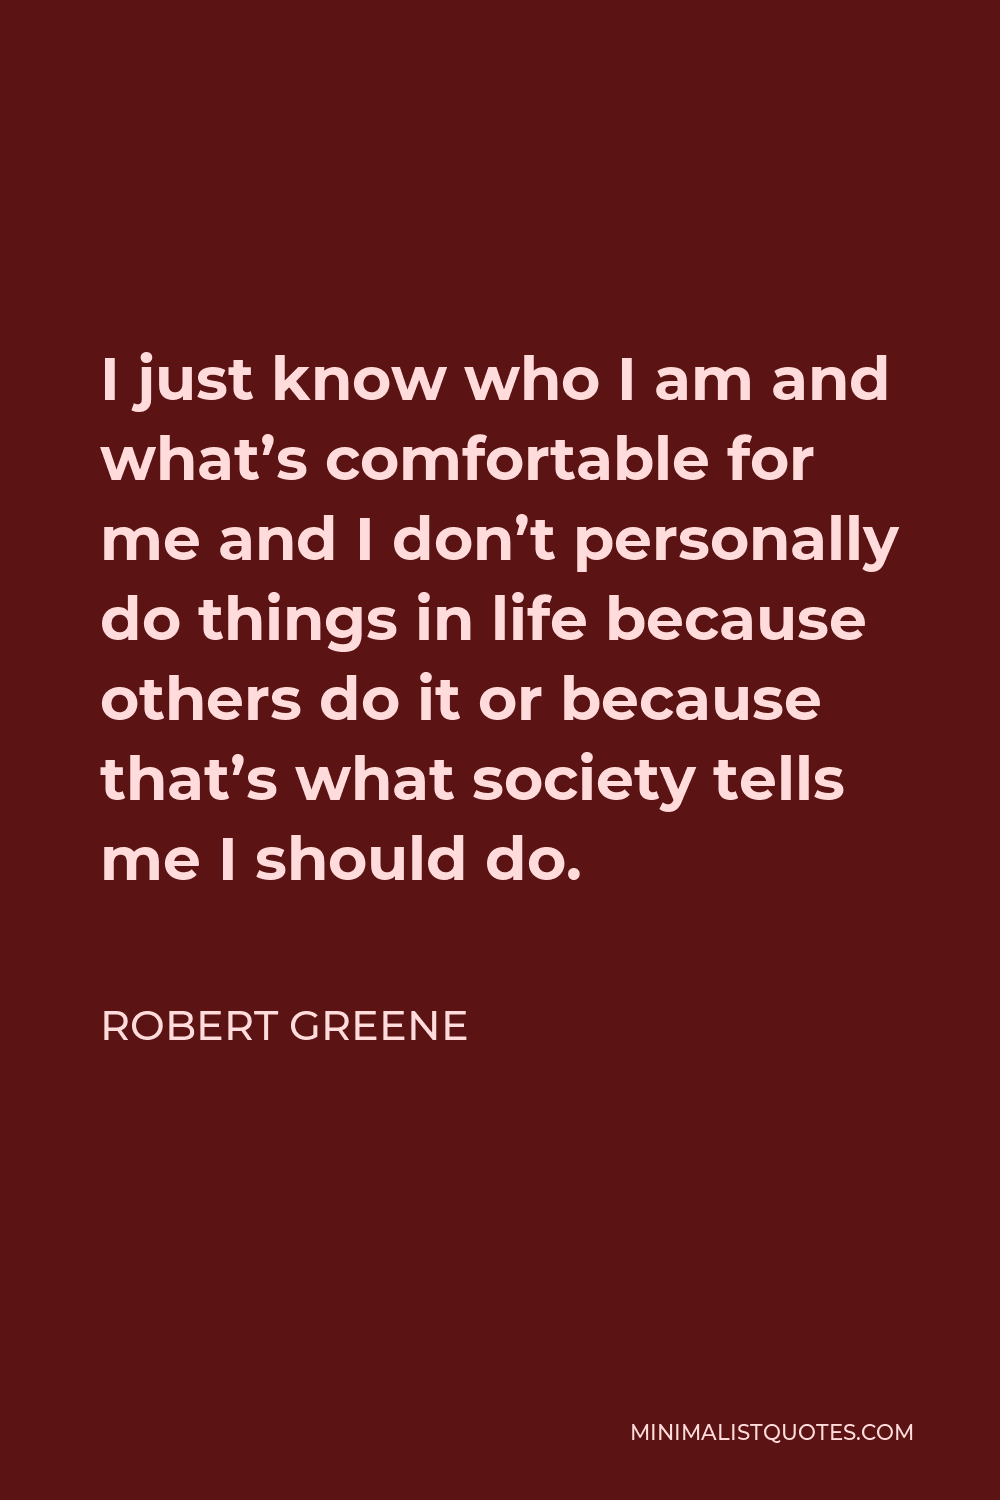 Robert Greene Quote - I just know who I am and what’s comfortable for me and I don’t personally do things in life because others do it or because that’s what society tells me I should do.